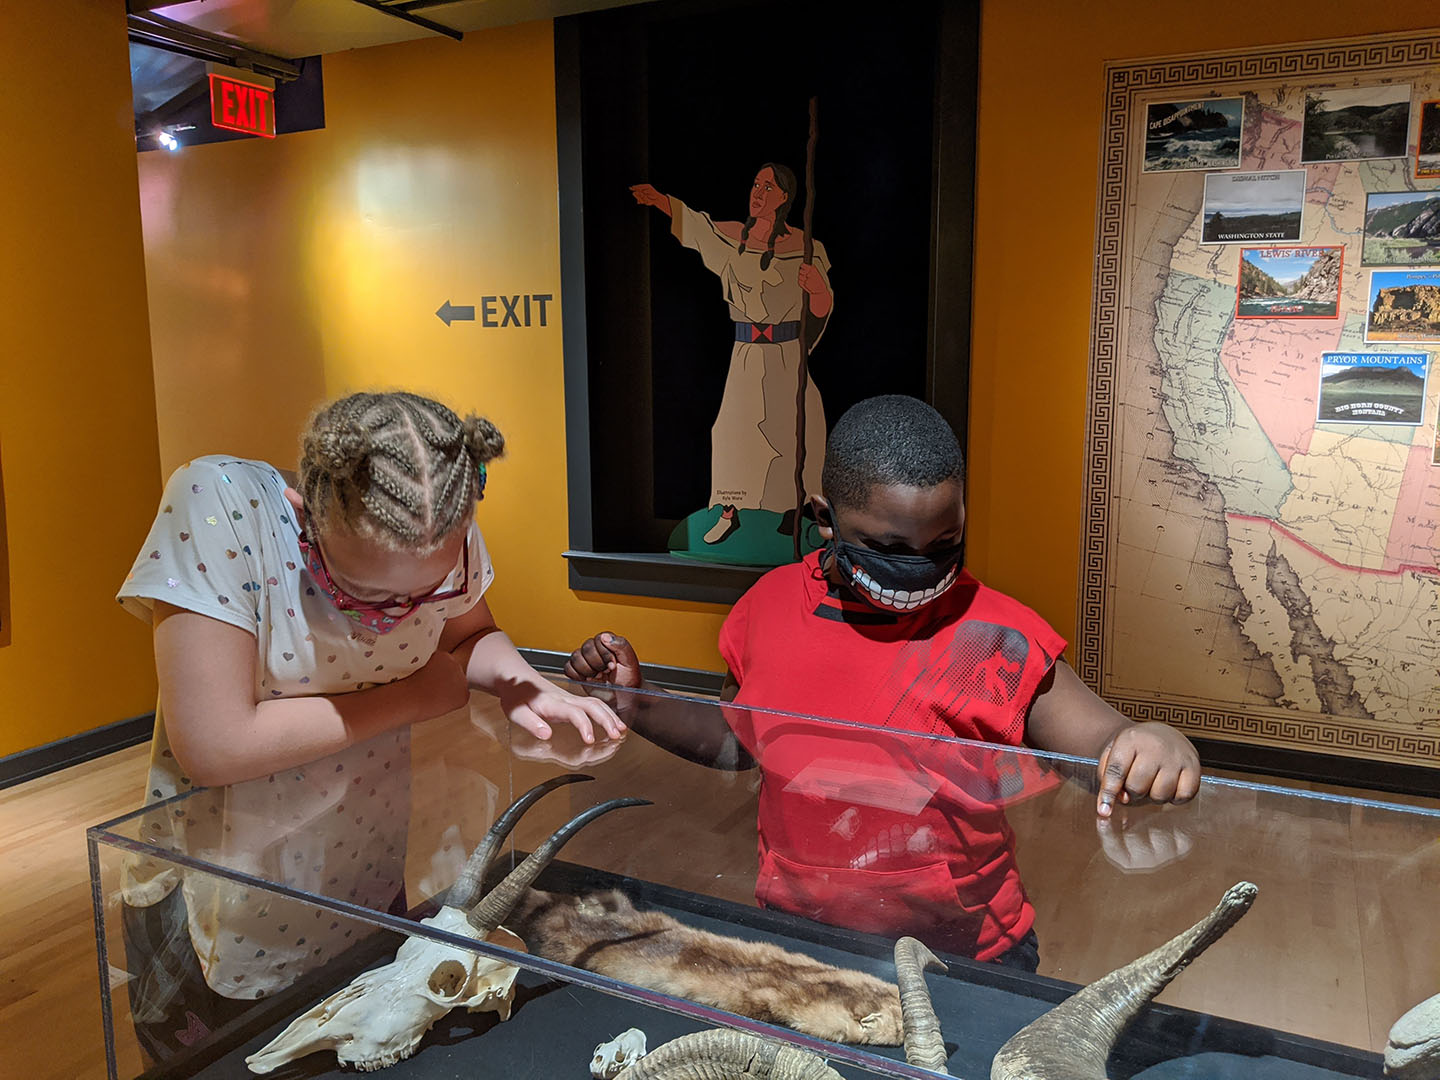 A young boy and a girl stand over a glass case in a museum looking at animal skulls and pelts.